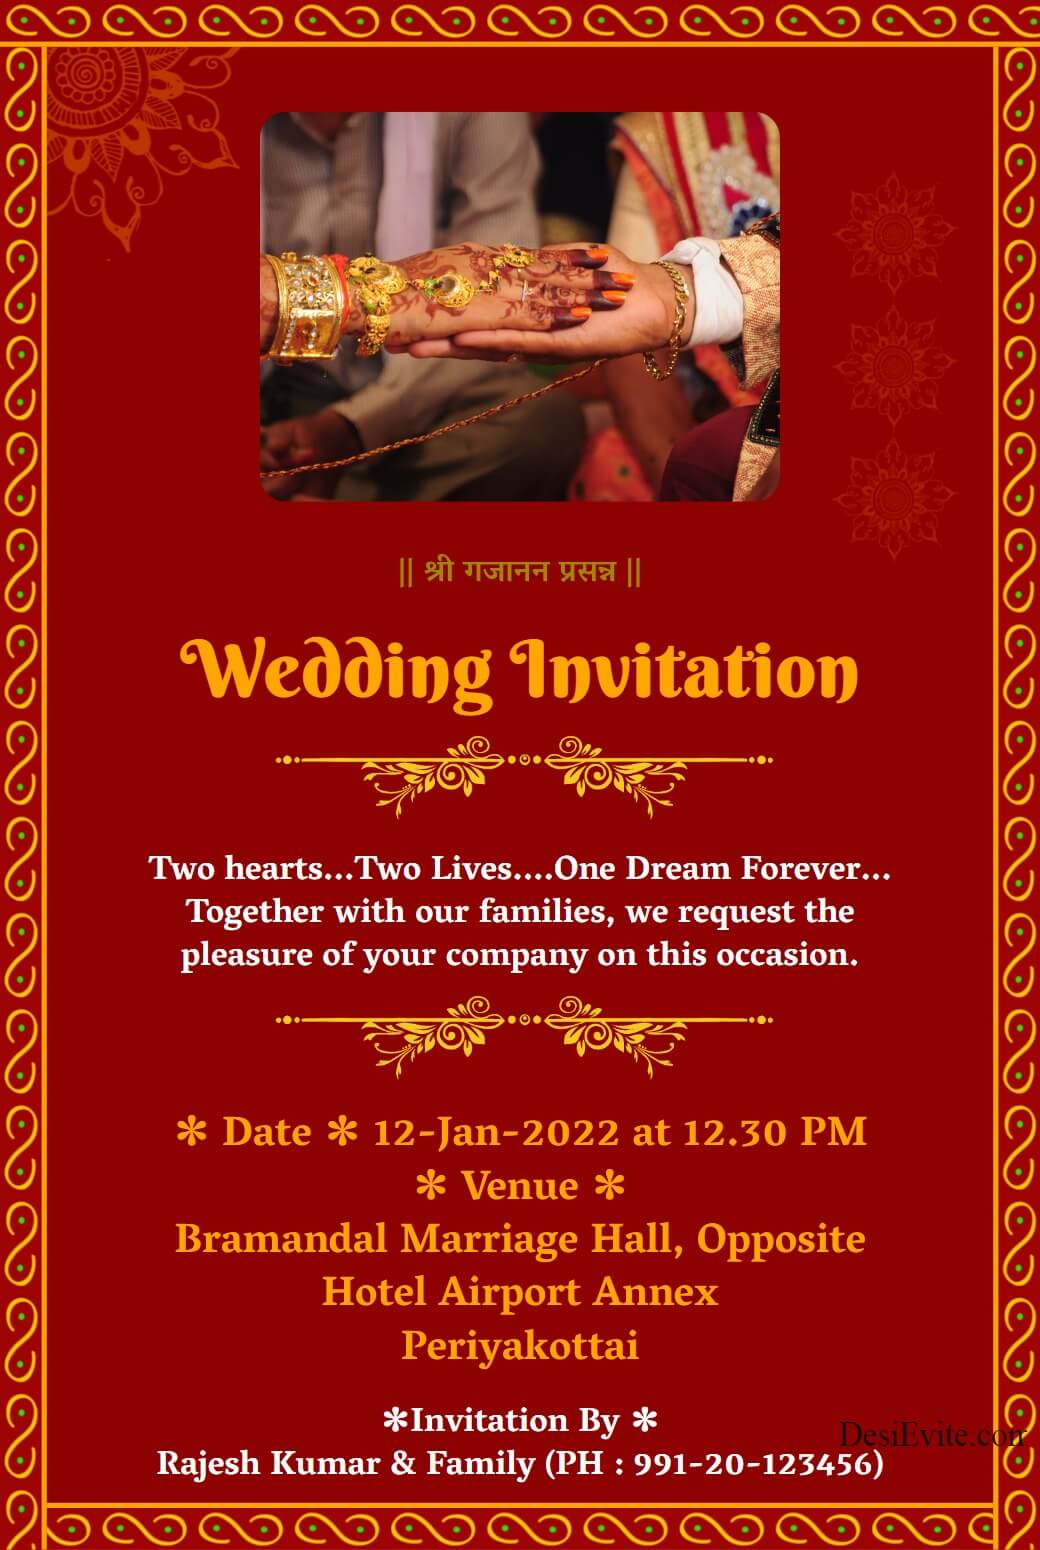 traditional wedding ecard red background with border 84 